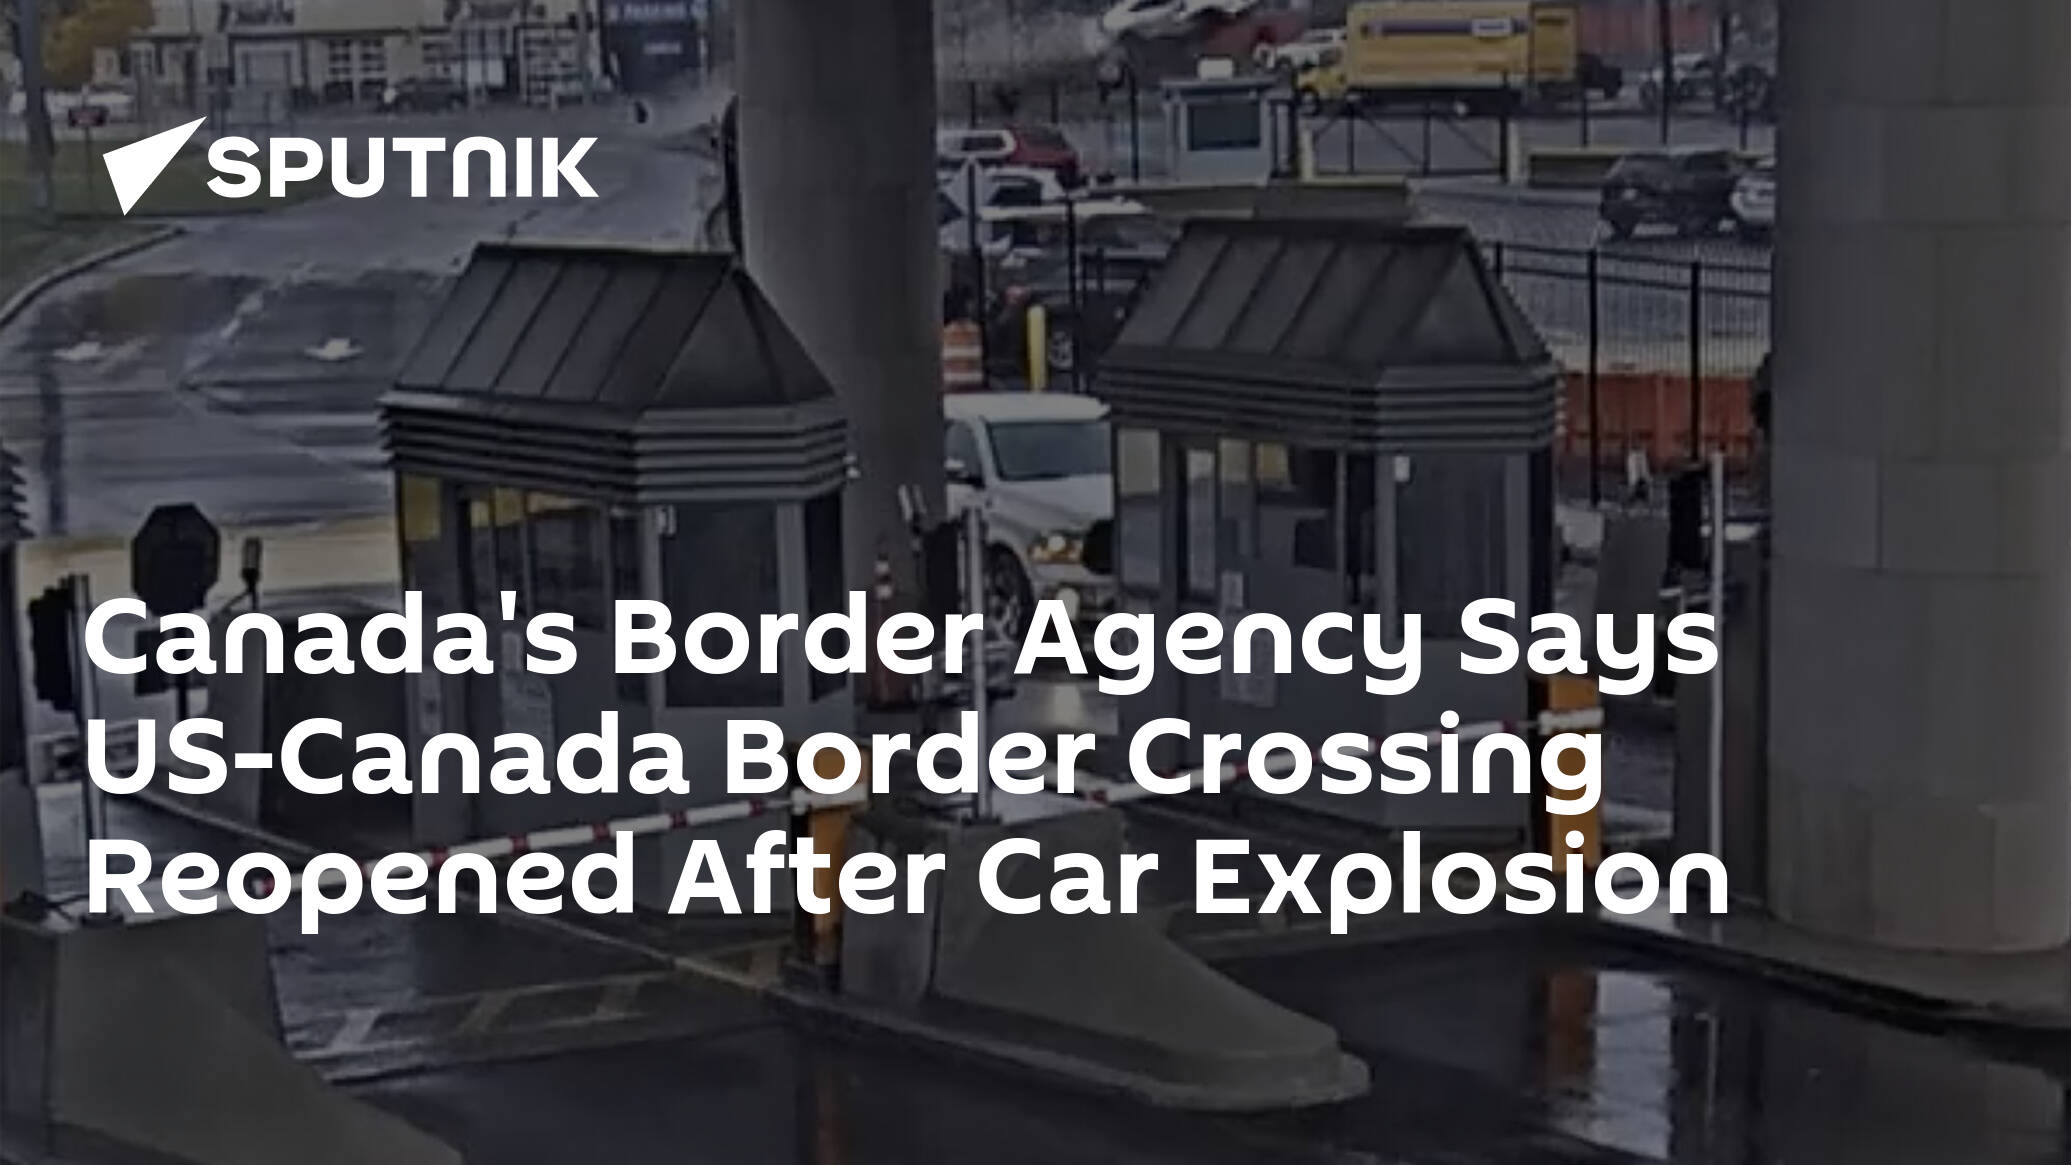 Canada's Border Agency Says US-Canada Border Crossing Reopened After Car Explosion